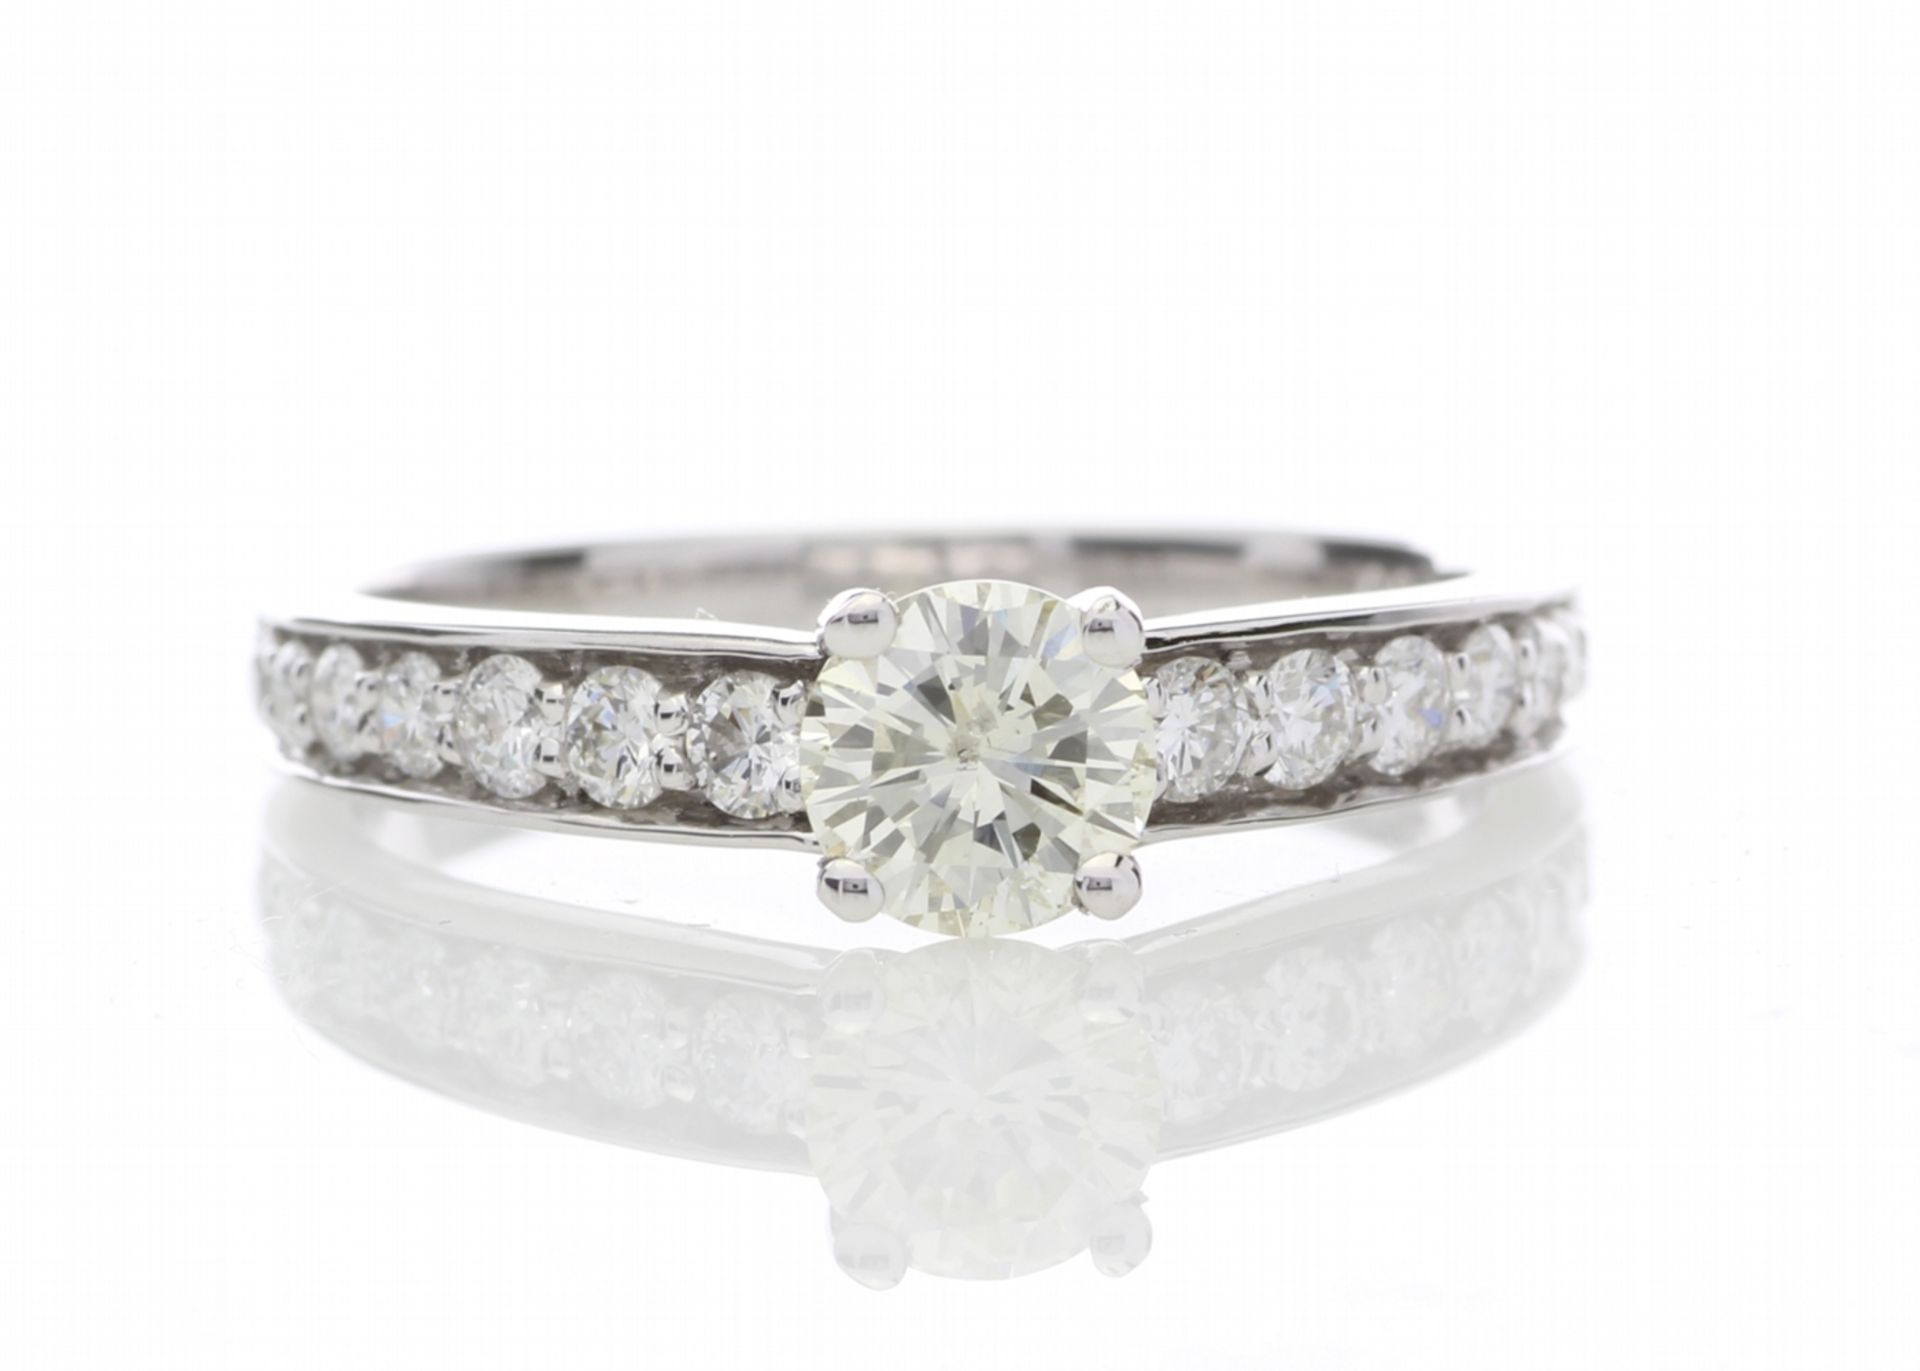 3113082-, *** RRP £9,250.00*** UNUSED - Certified by GIE 18ct White Gold Single Stone Diamond Ring - Image 4 of 4